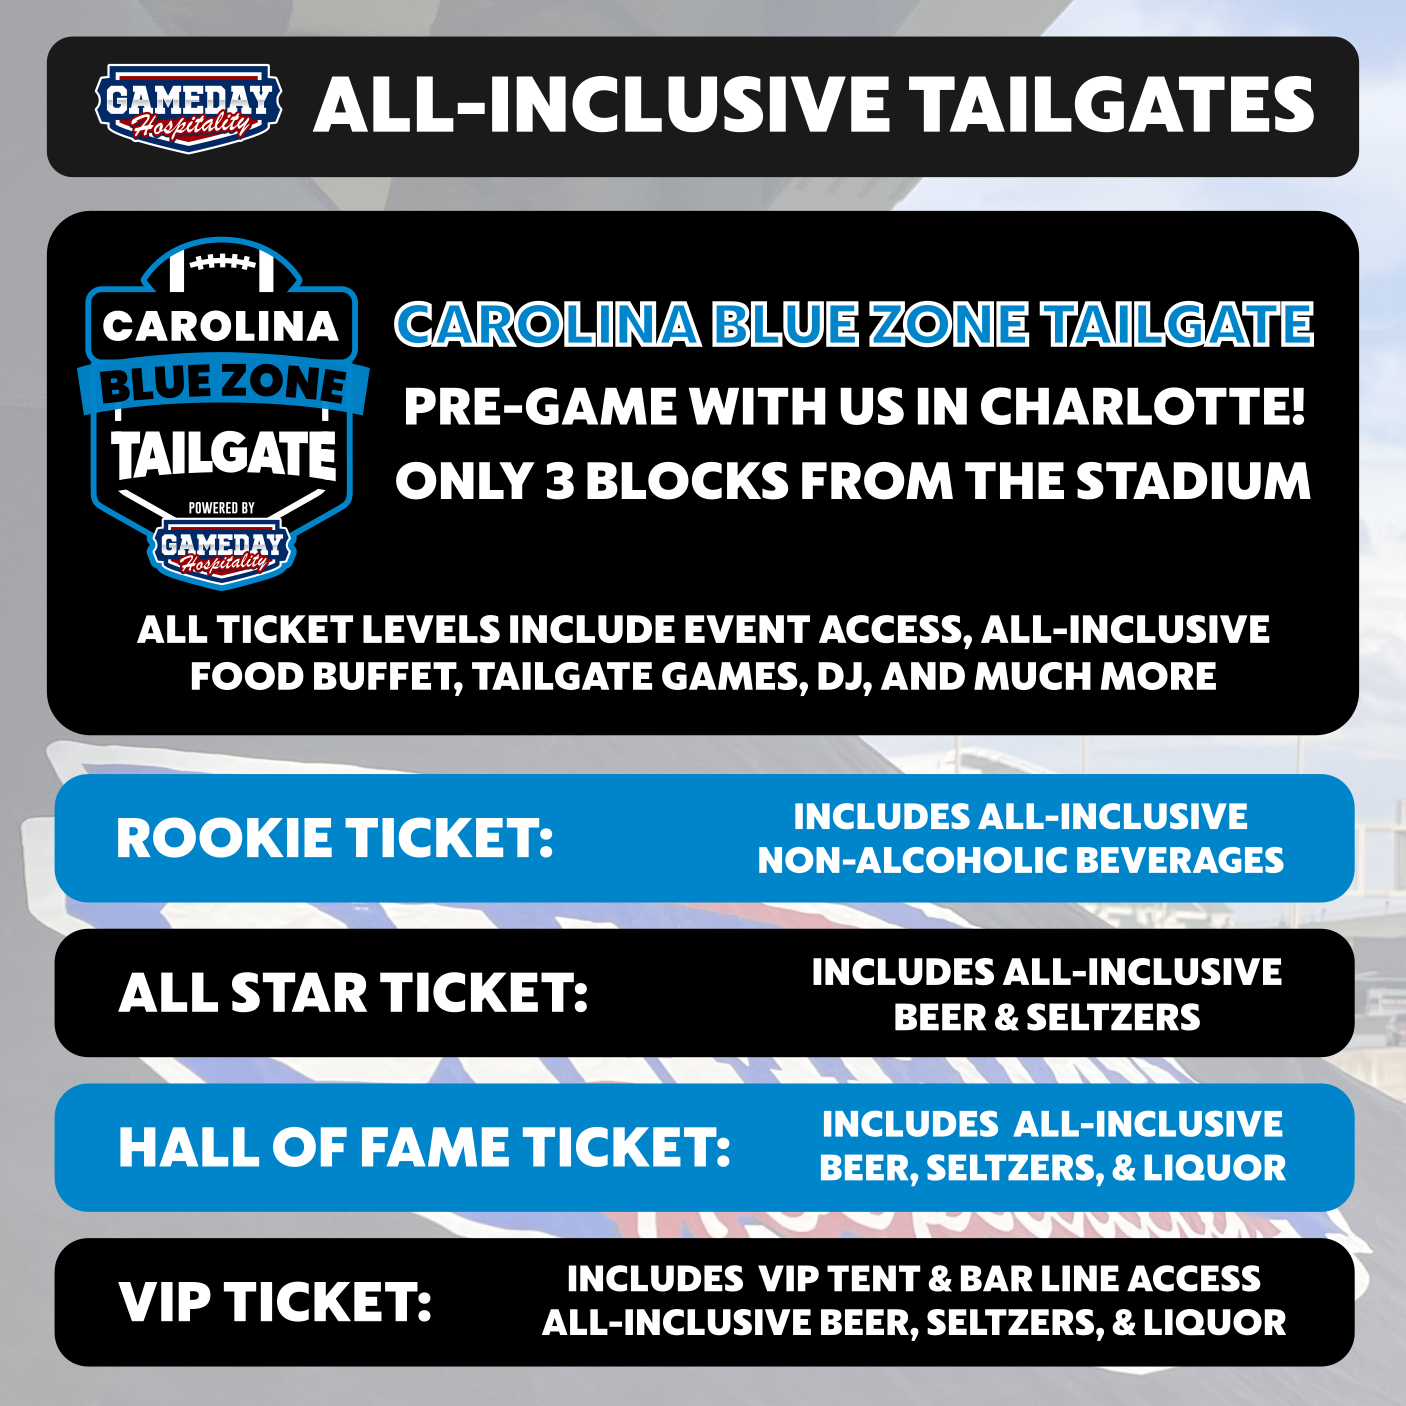 Gameday Hospitality - Charlotte Seating Chart: Panthers Tailgate